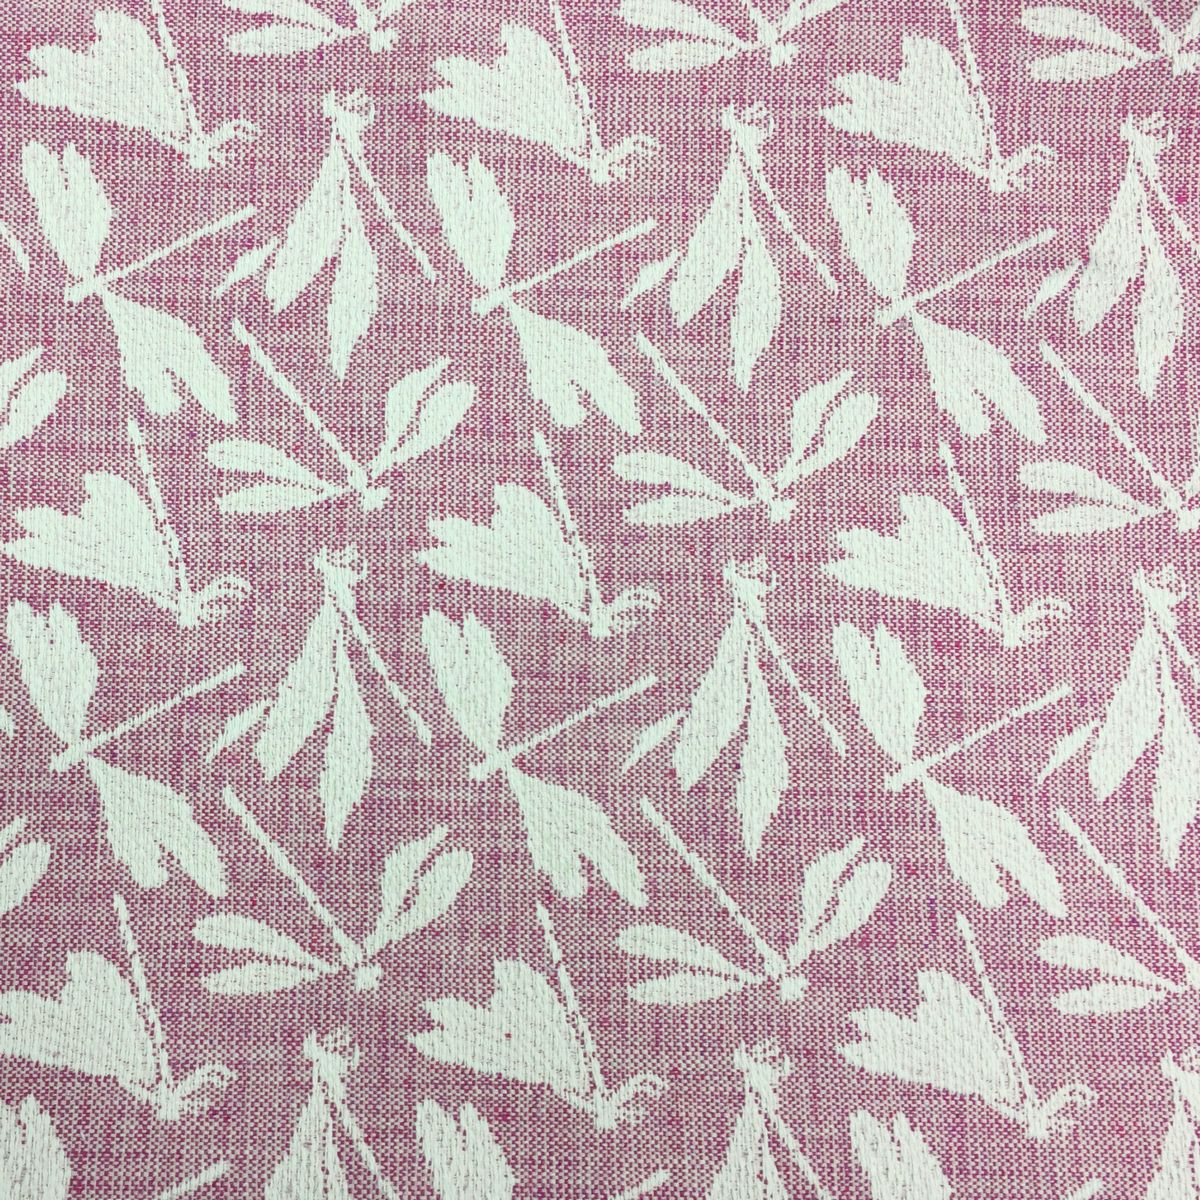 Meddon Orchid Fabric by Voyage Maison